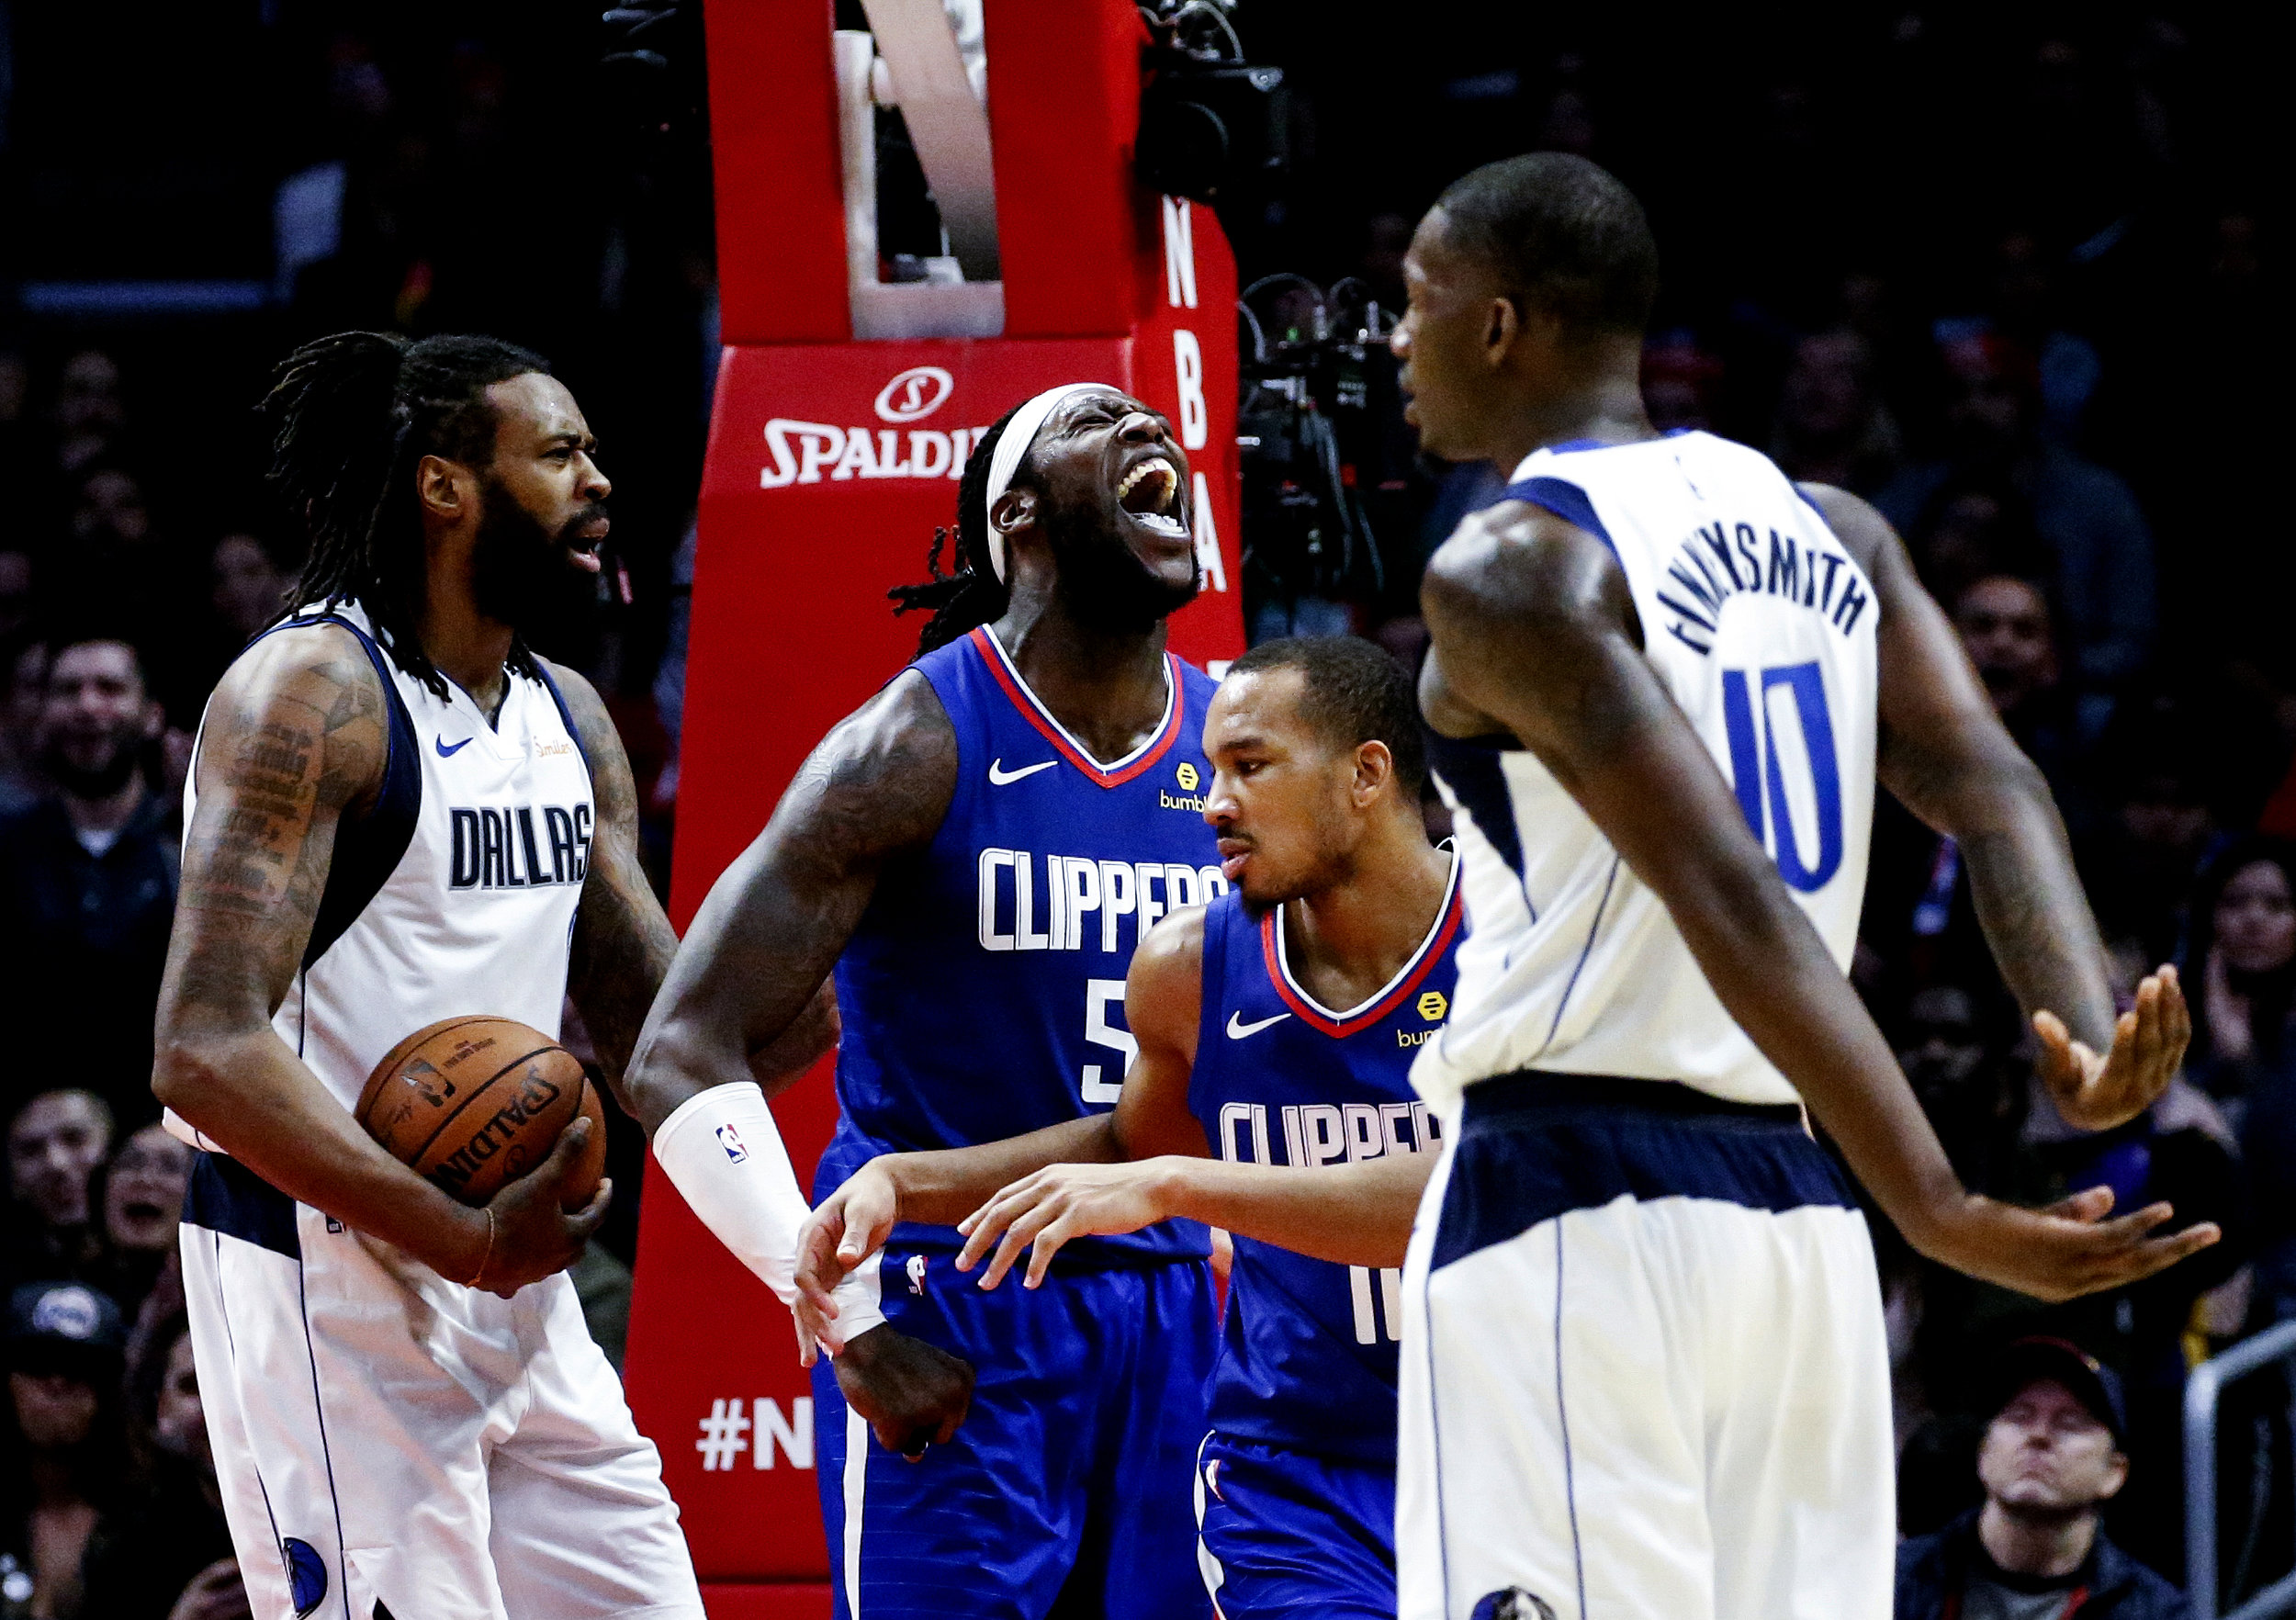  Los Angeles Clippers’ Montrezl Harrell (5) yells in an NBA basketball game between Los Angeles Clippers and Dallas Mavericks om Thursday, Dec. 20, 2018, in Los Angeles. The Clippers won 125-121.
 